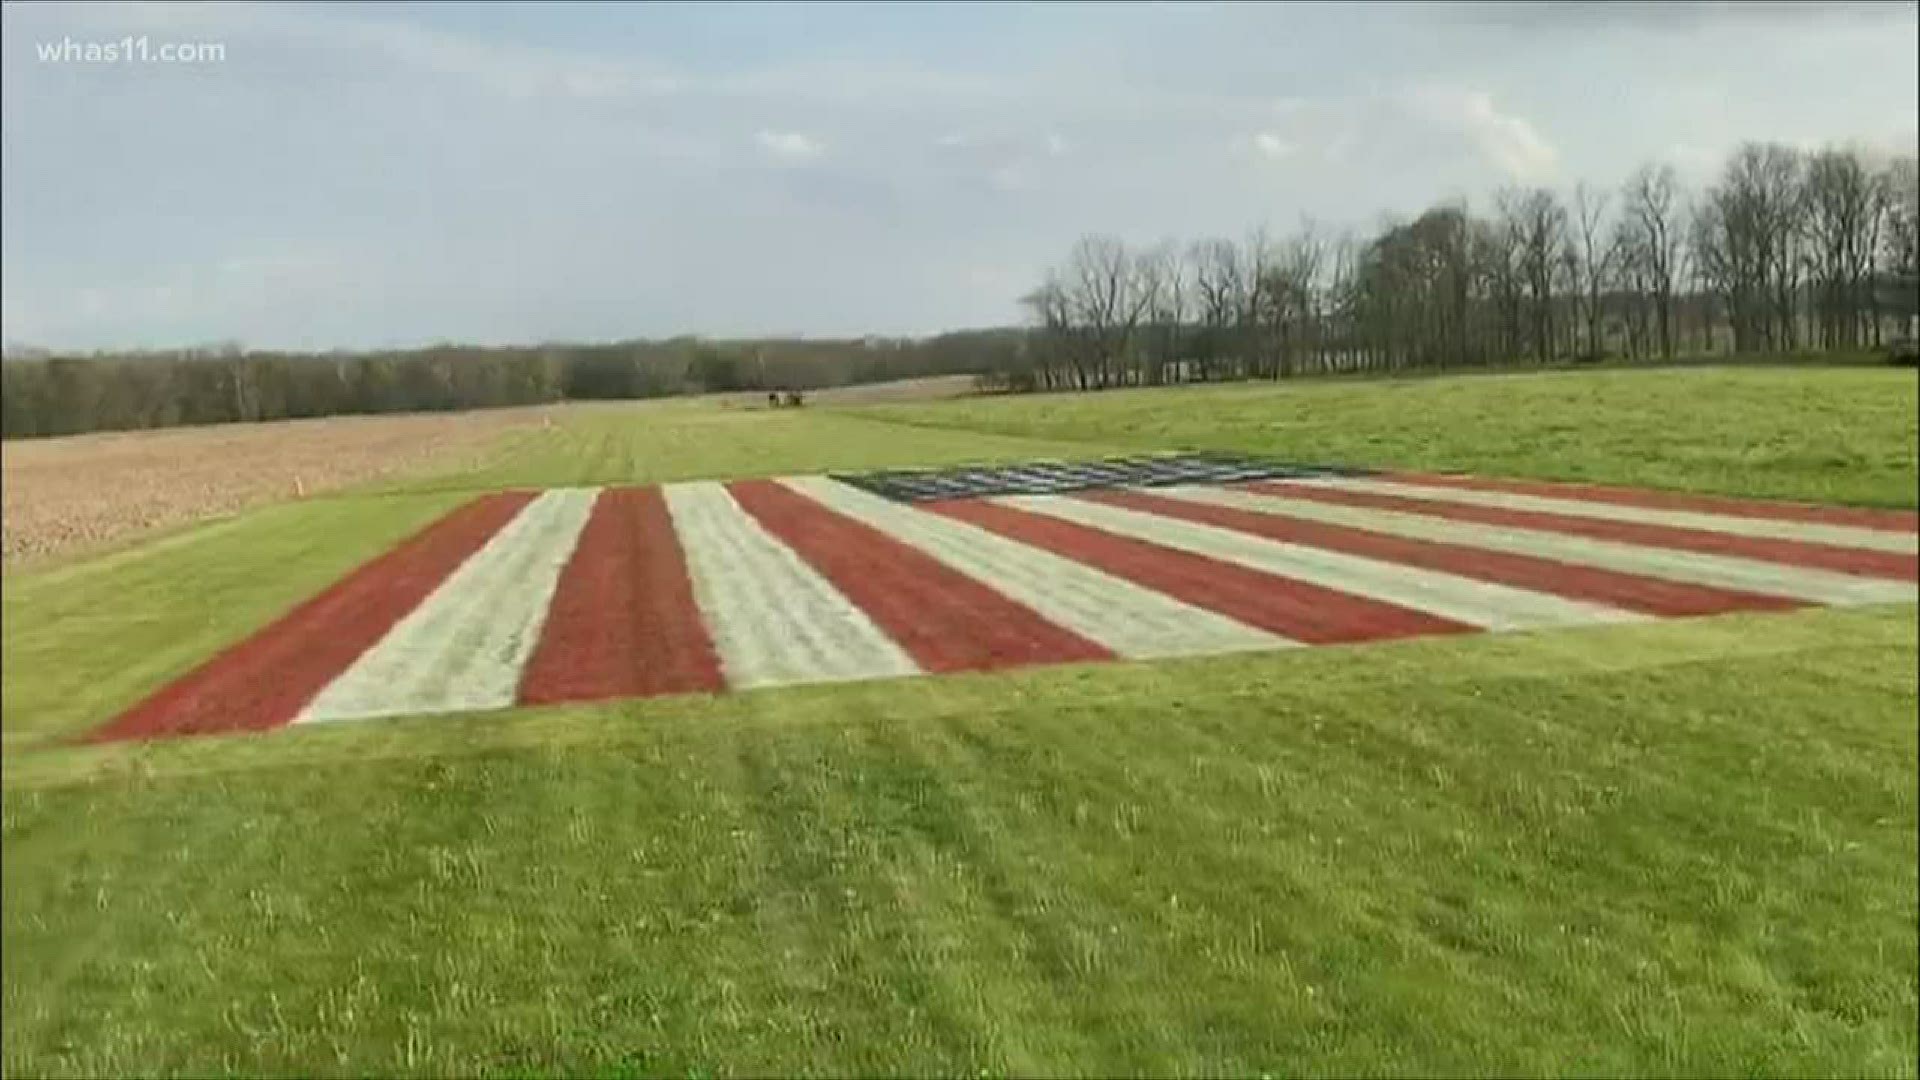 Justin Riggins of Crawfordsville spent two days painting a flag that could be visible from airplanes in honor of those on the front-lines of the pandemic.